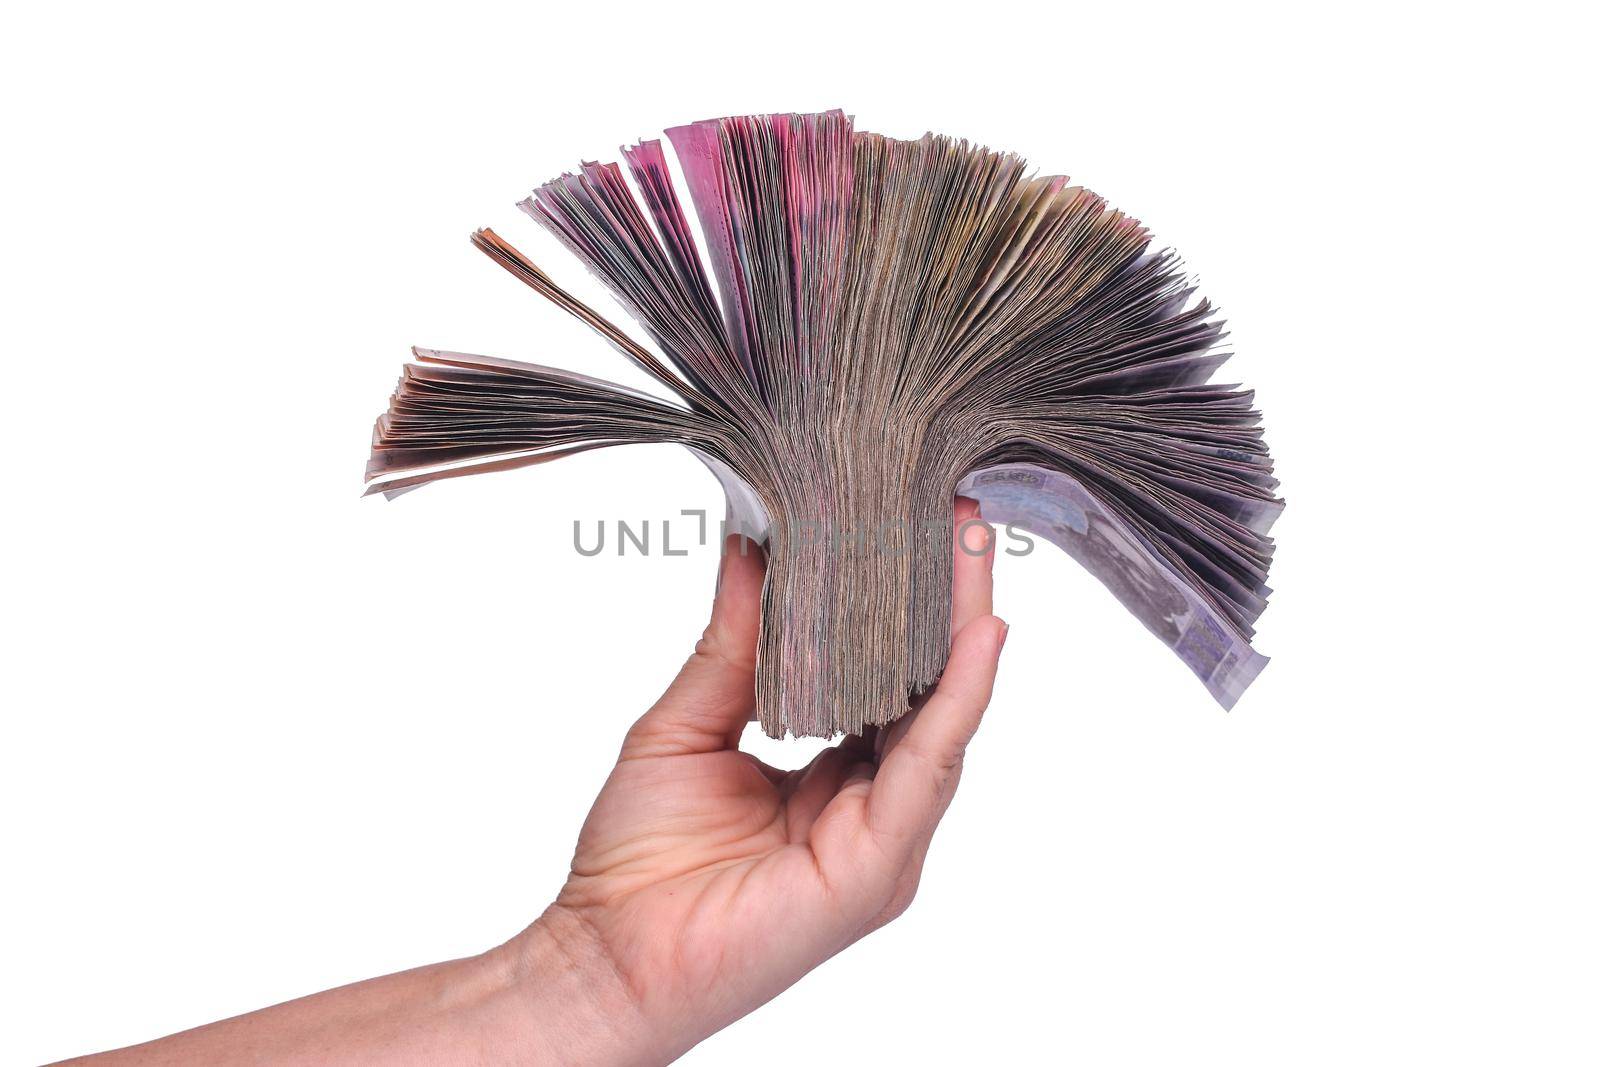 a wad of banknotes in her hand on a white background. Ukrainian hryvnia, paper money. isolated.